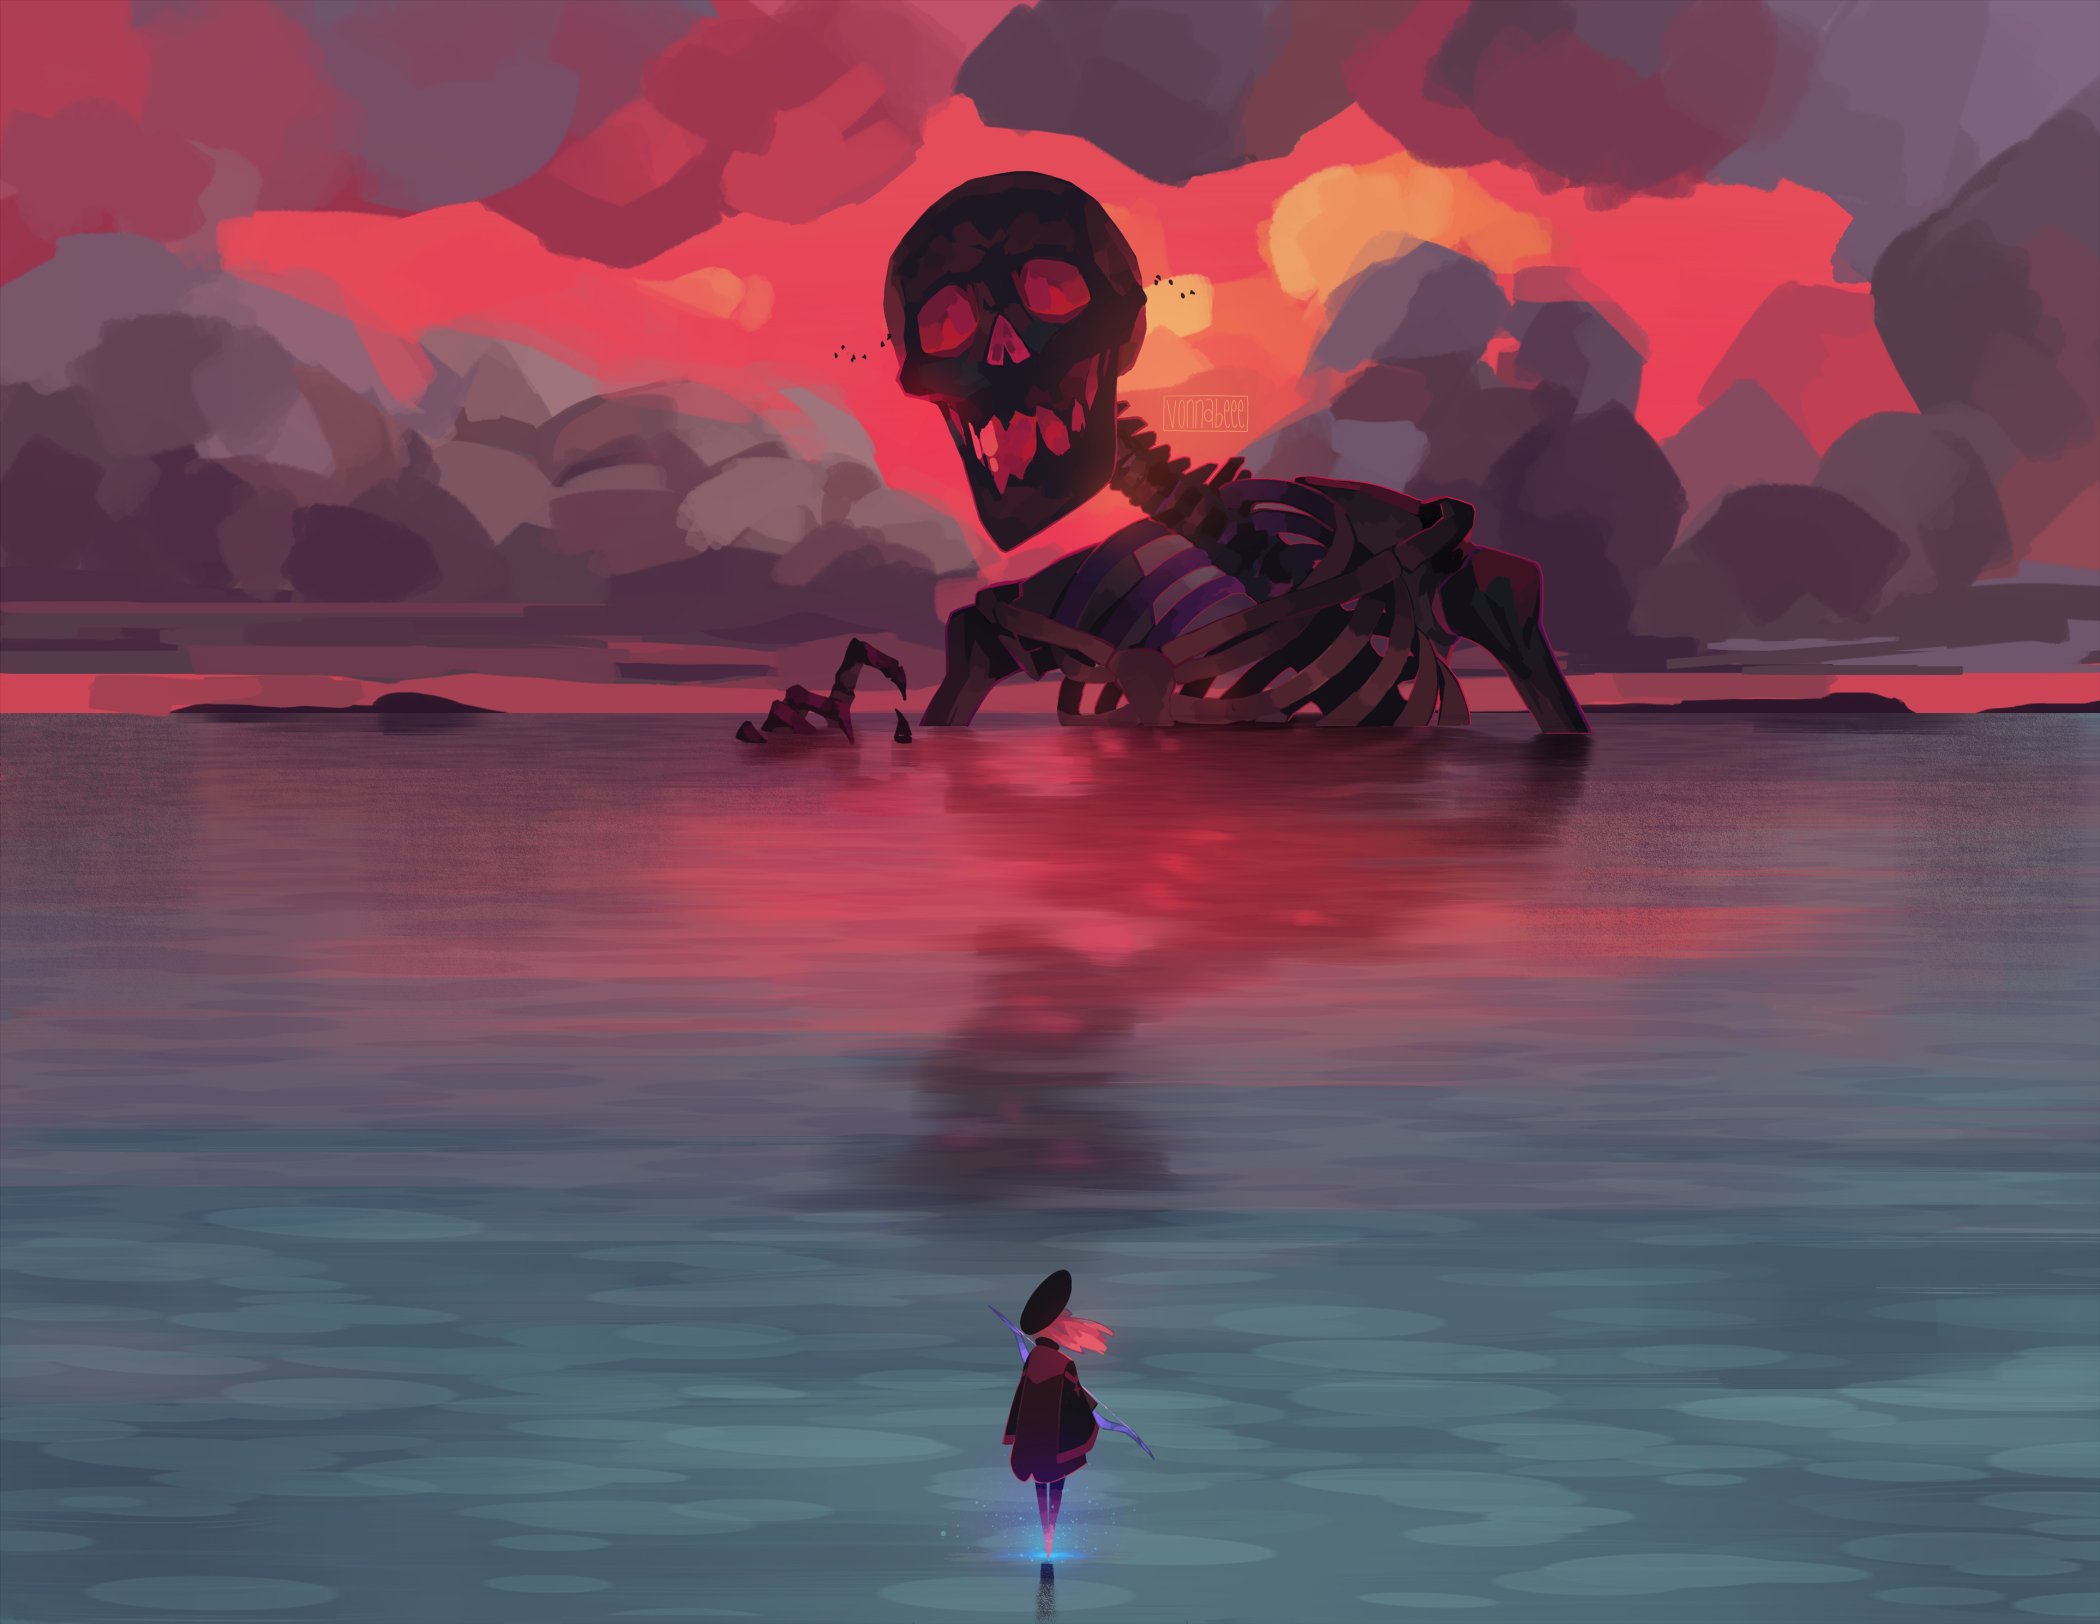 artwork by @vonnabeee on twitter. Image itself contains an expanse of water - be it a massive lake, sea, or ocean - with hinds of land along the horizon line. A massive skeleton sits at the top of the image barely half risen from the water. One hand only has a few fingers raised out of the water and the jaw is handing crooked from the skull. The sky behind the skeleton is a blend of orange and pink, causing an interesting not quite red look. In the foreground at the bottom of the image is a person. They appear to be standing on the water with a blue light glowing from beneath their feet and only where their feet are at the water. They hold a staff and are dressed in what looks to be a robe of some sort, like a graduation robe cut short before the knee. They wear a round broadrim had with hair the same color as the sky blowing towards the right of the image. There is blue along the staff that is hidden by the person's torso.